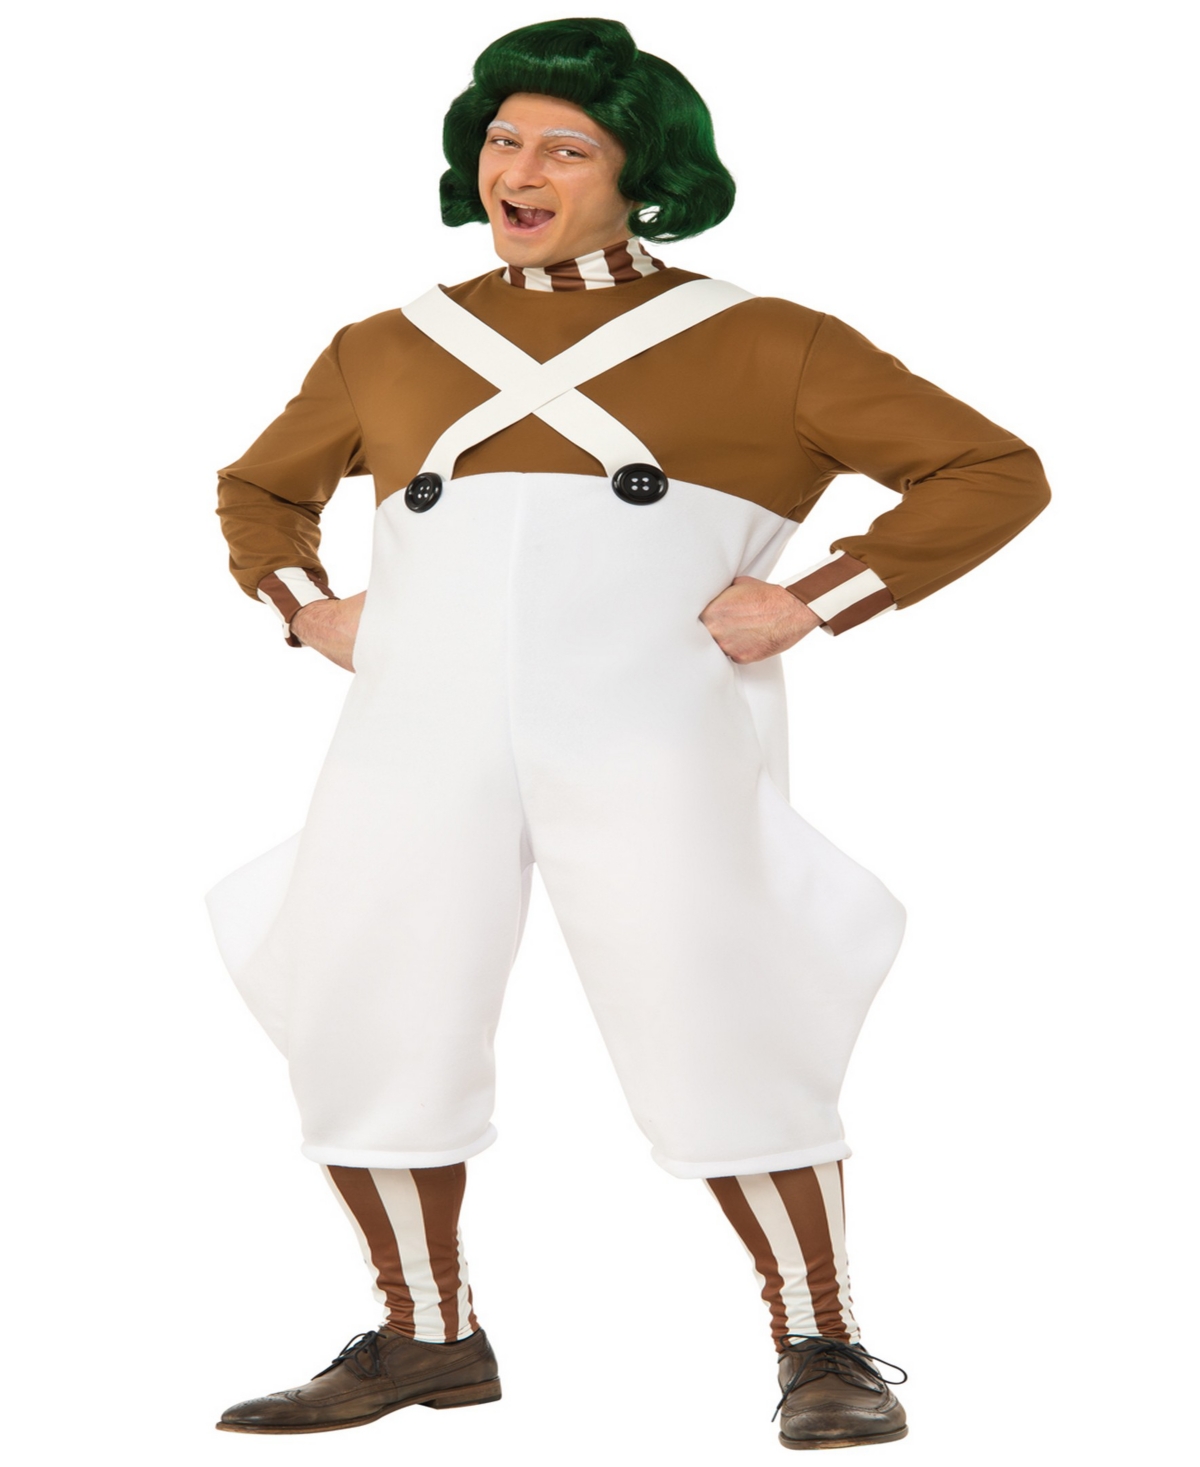 Buy Seasons Men's Willy Wonka and the Chocolate Factory: Oompa Loompa Deluxe Costume - White